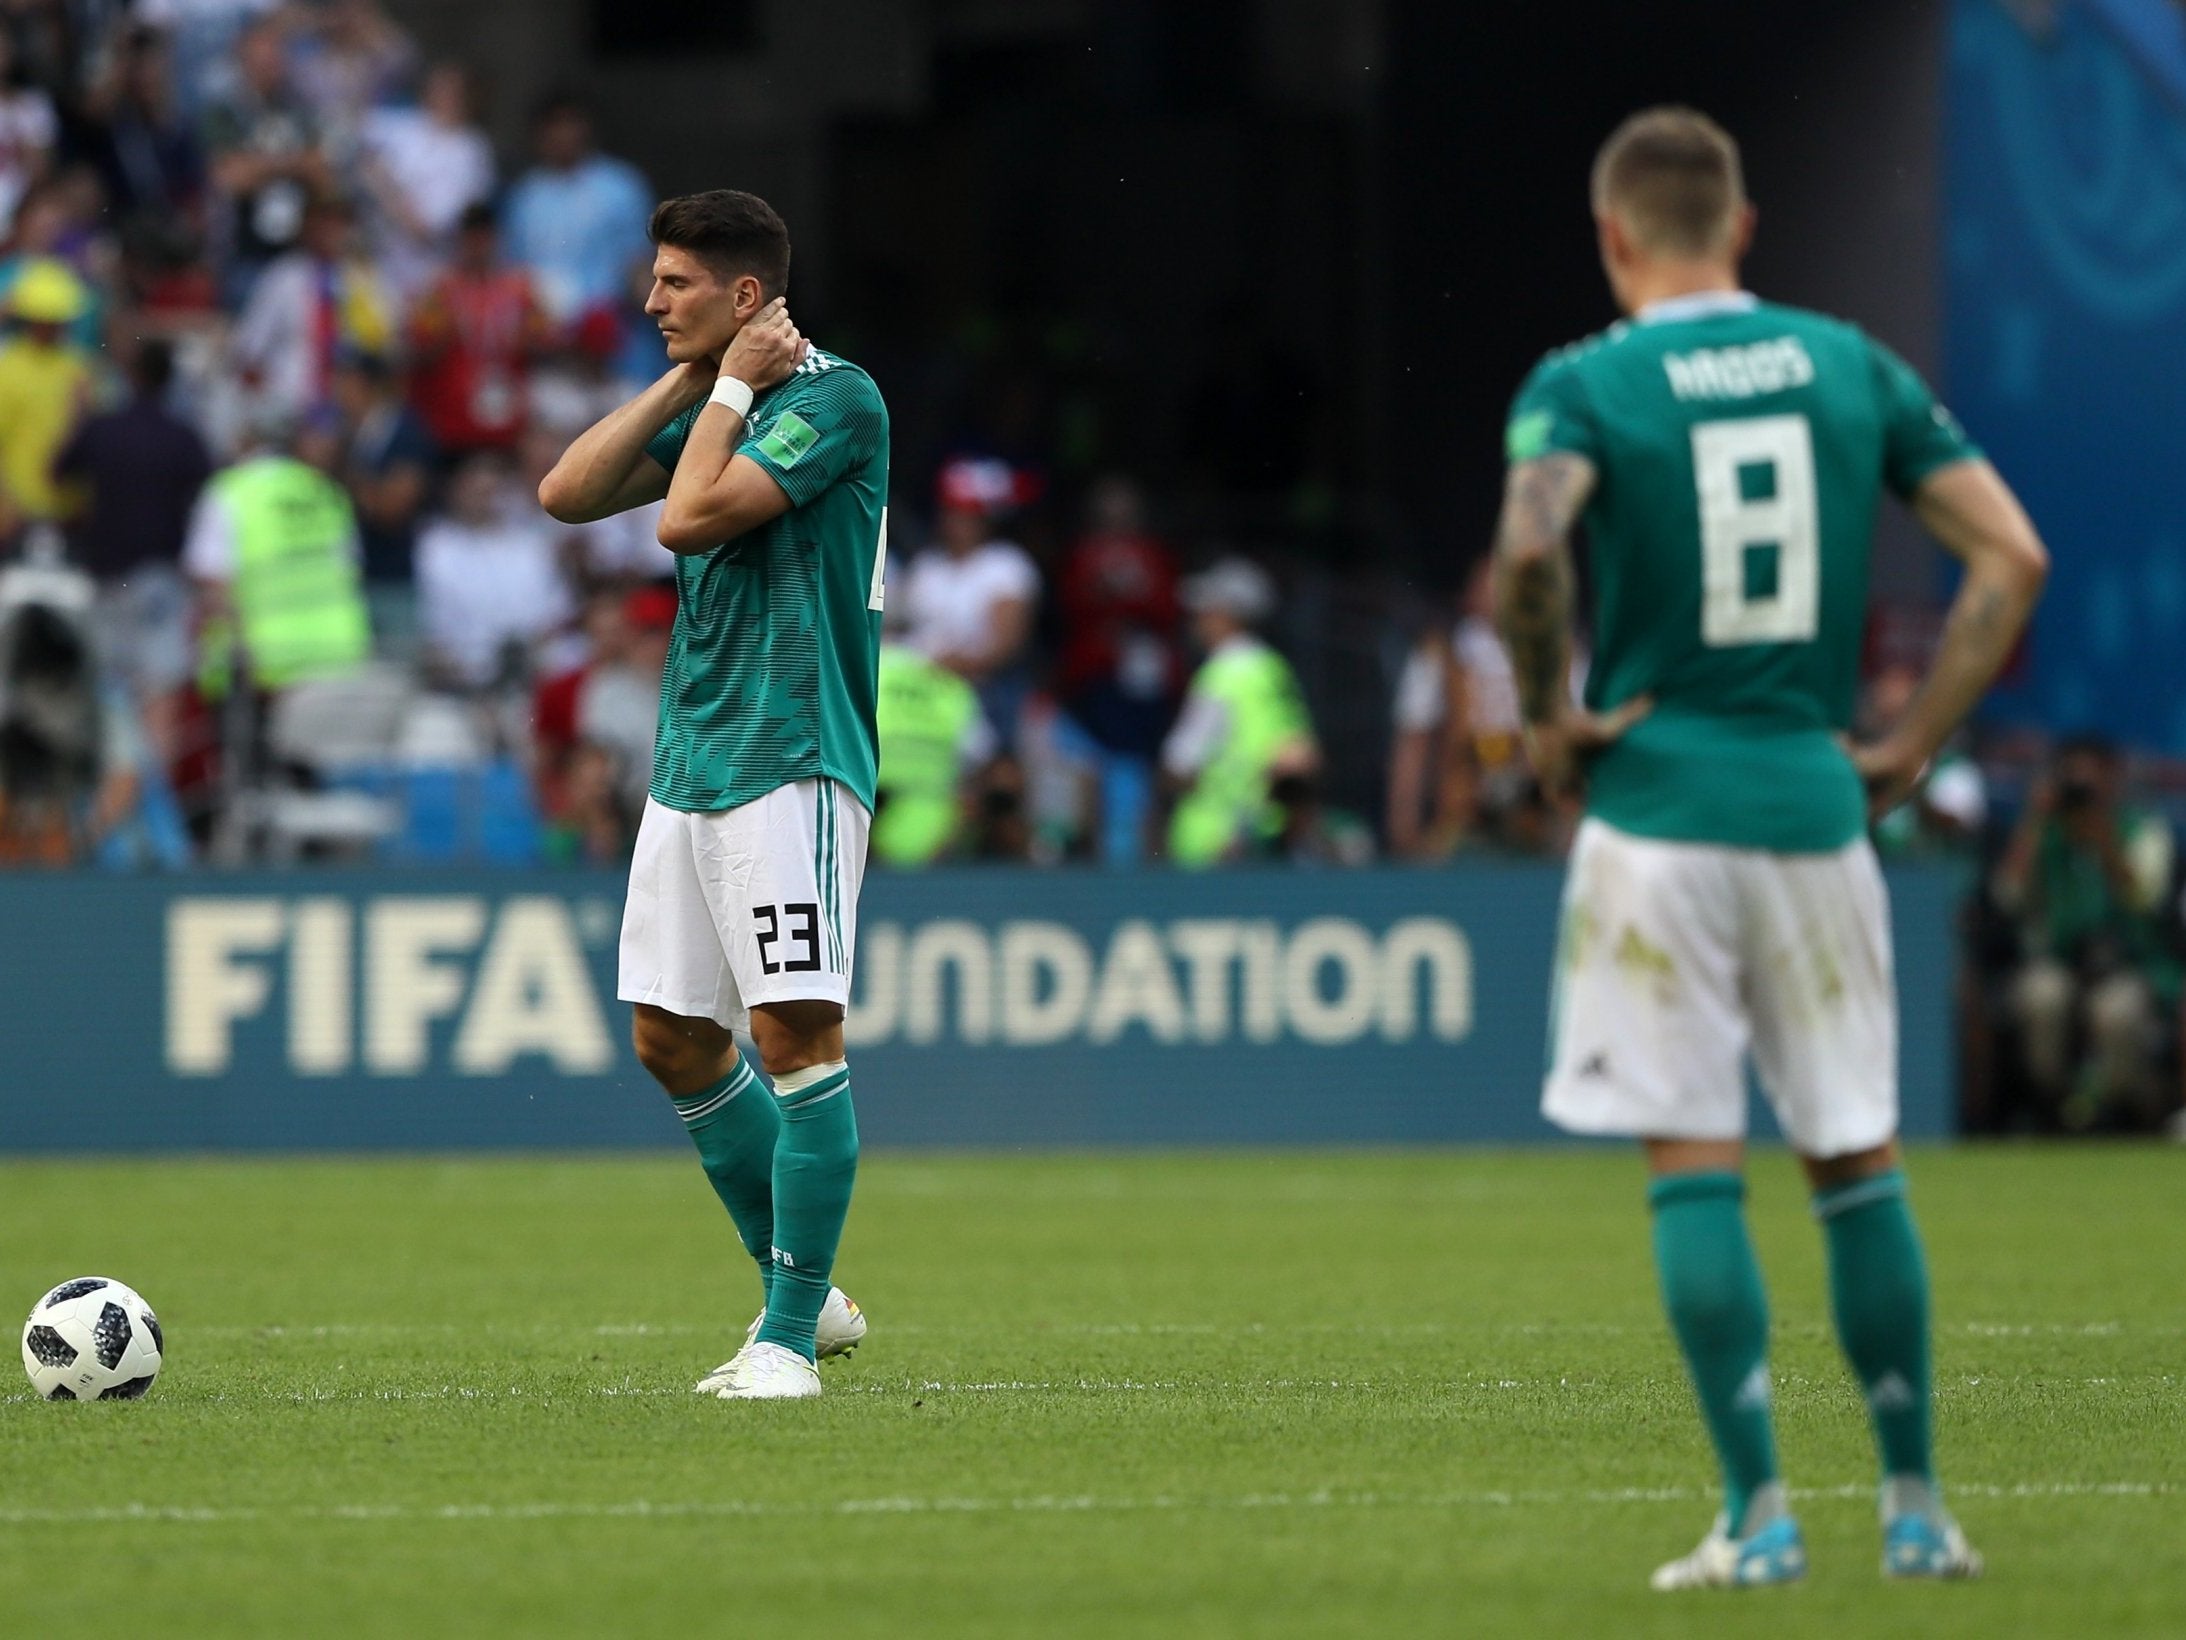 Germany are out at the group stage for the first time in 80 years